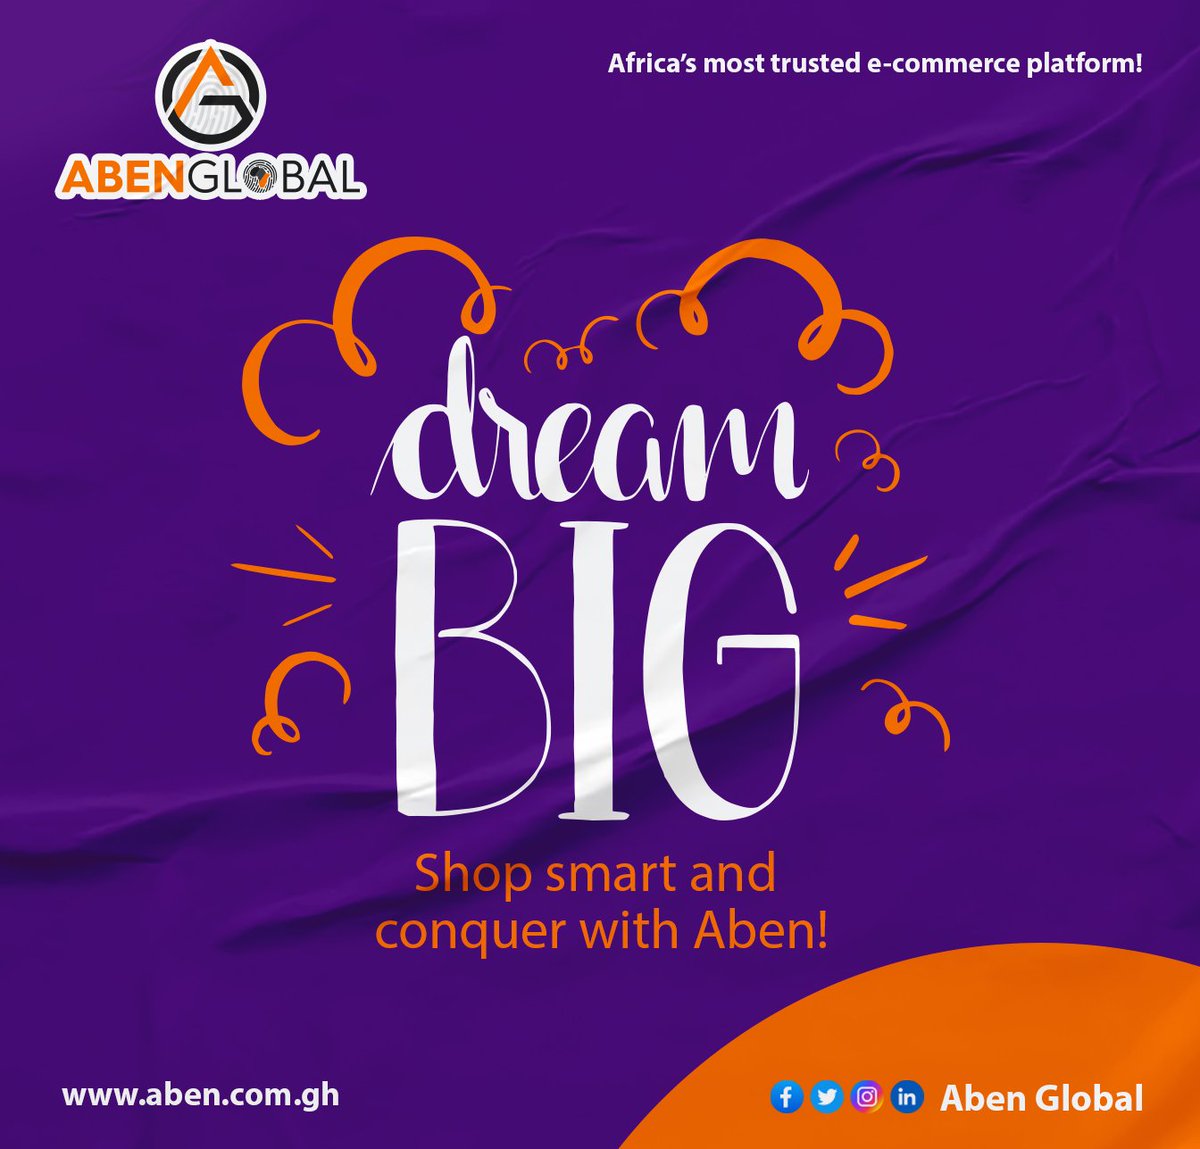 Dreaming big ignites innovation and propels individuals to exceed their limits. #UnlimitedPotential.

#AbenMonday #AGmonday #AbenGlobal #aben #BelieveInYourself #dreambig

Trends: #gyakyequayson #GralinoXtra #TV3NewDay #KennedyAgyapong #Modric #Messi10 #MohammedKudus